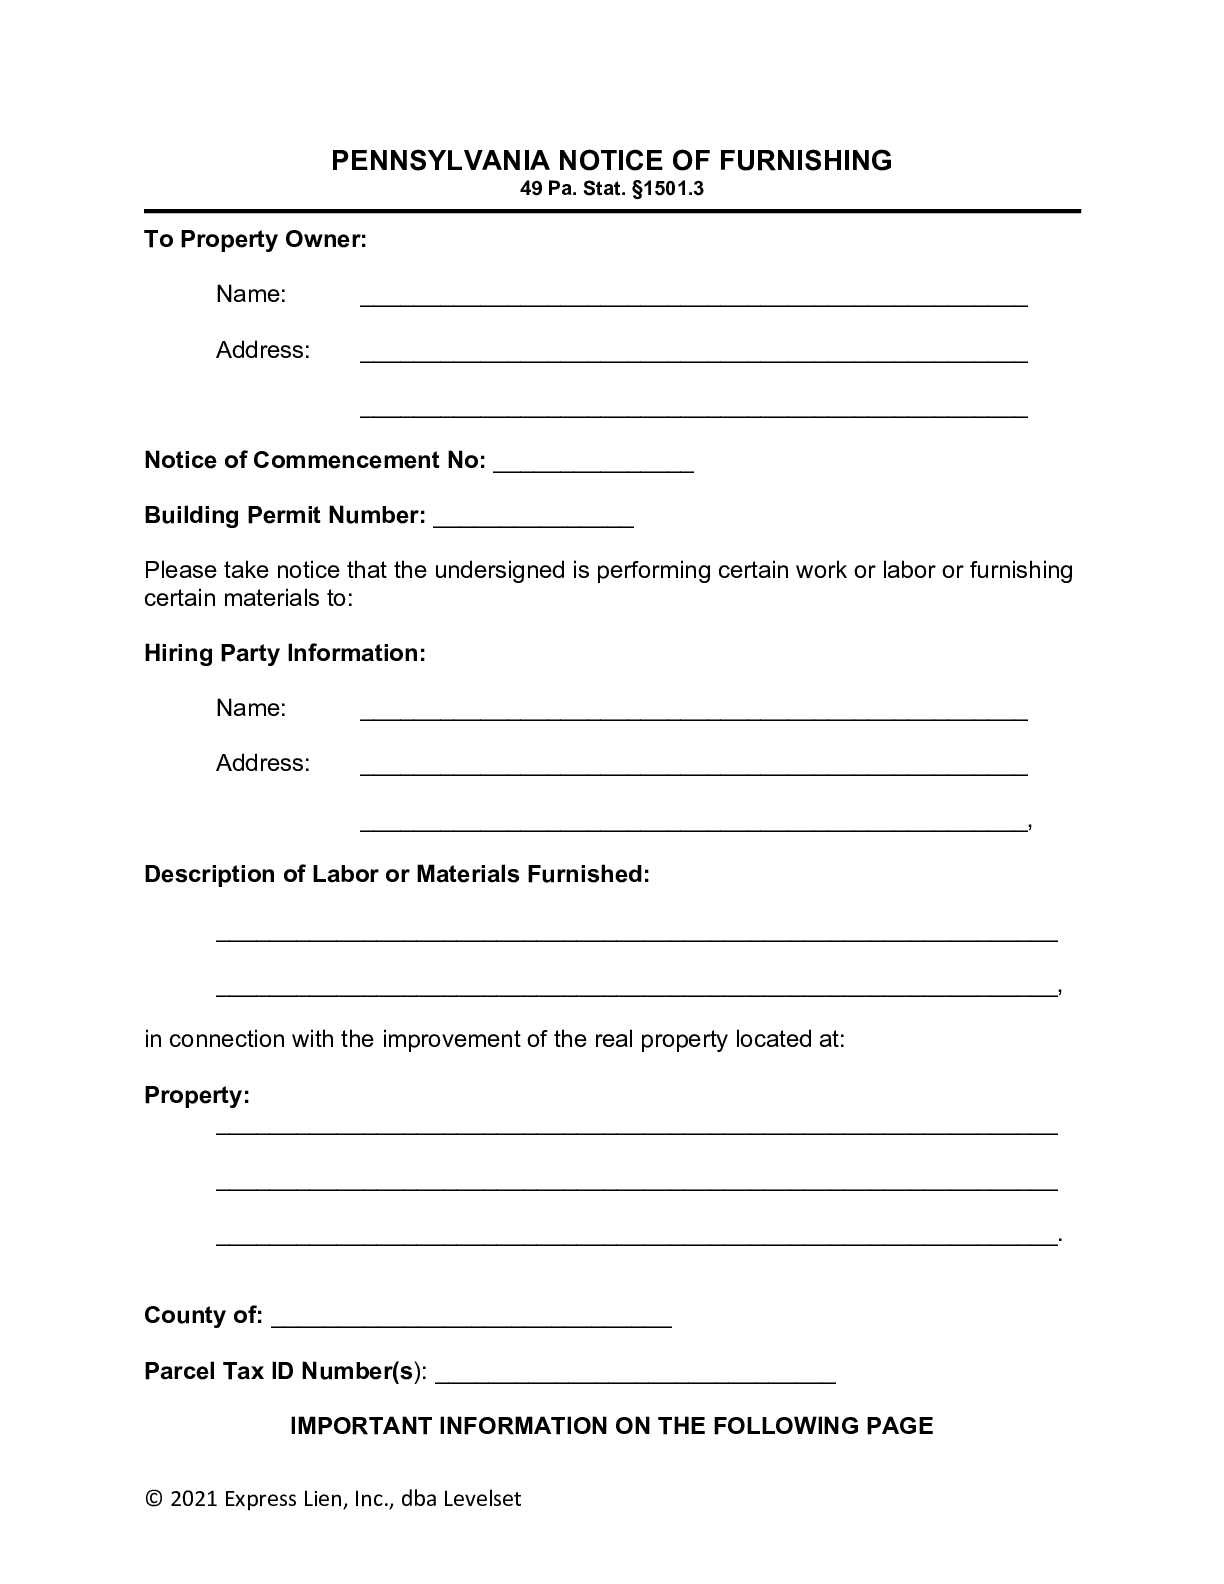 Pennsylvania Notice of Furnishing Form | Free Downloadable Template - free from